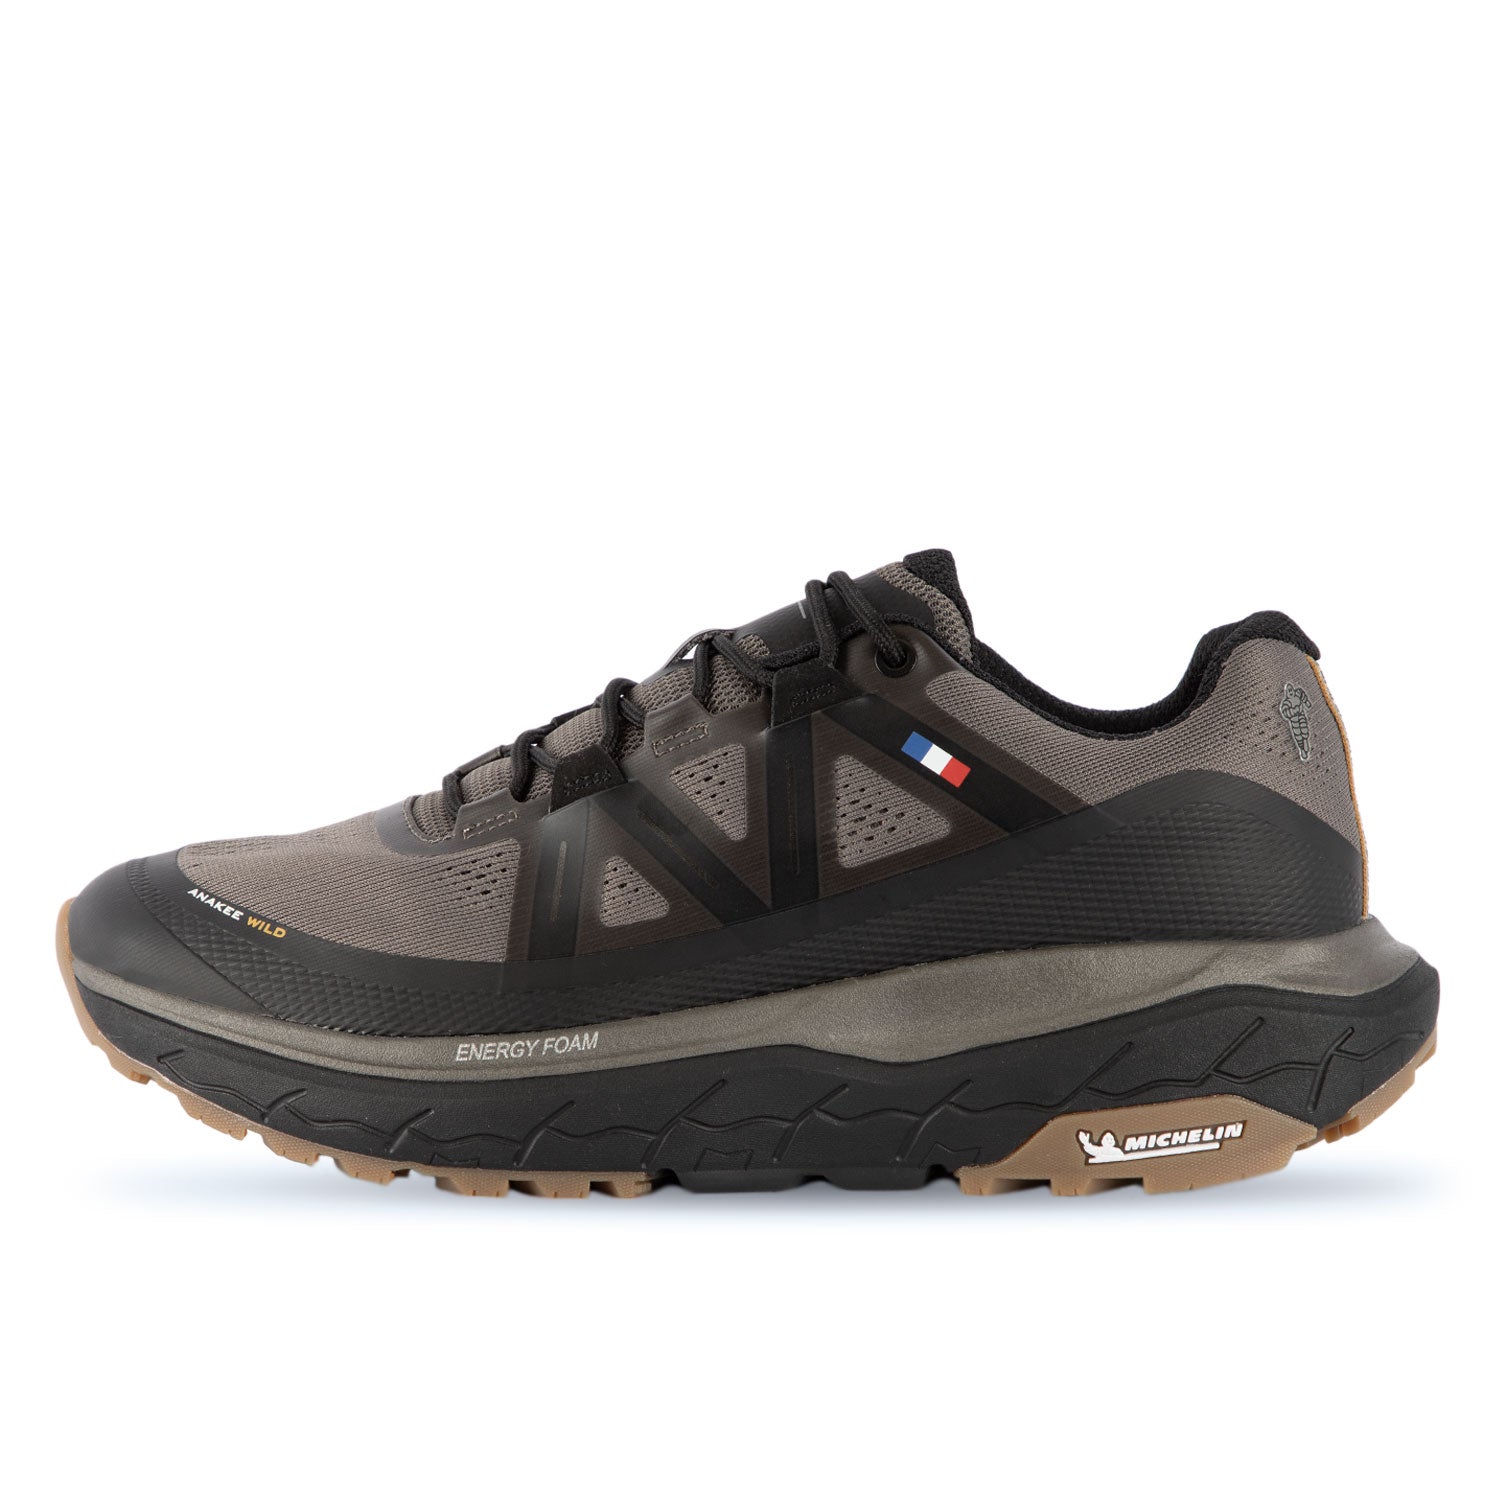 ZAPATILLA TRAIL RUNNING HOMBRE NEGRO GRIS OSCURO MICHELIN FOOTWEAR AW02